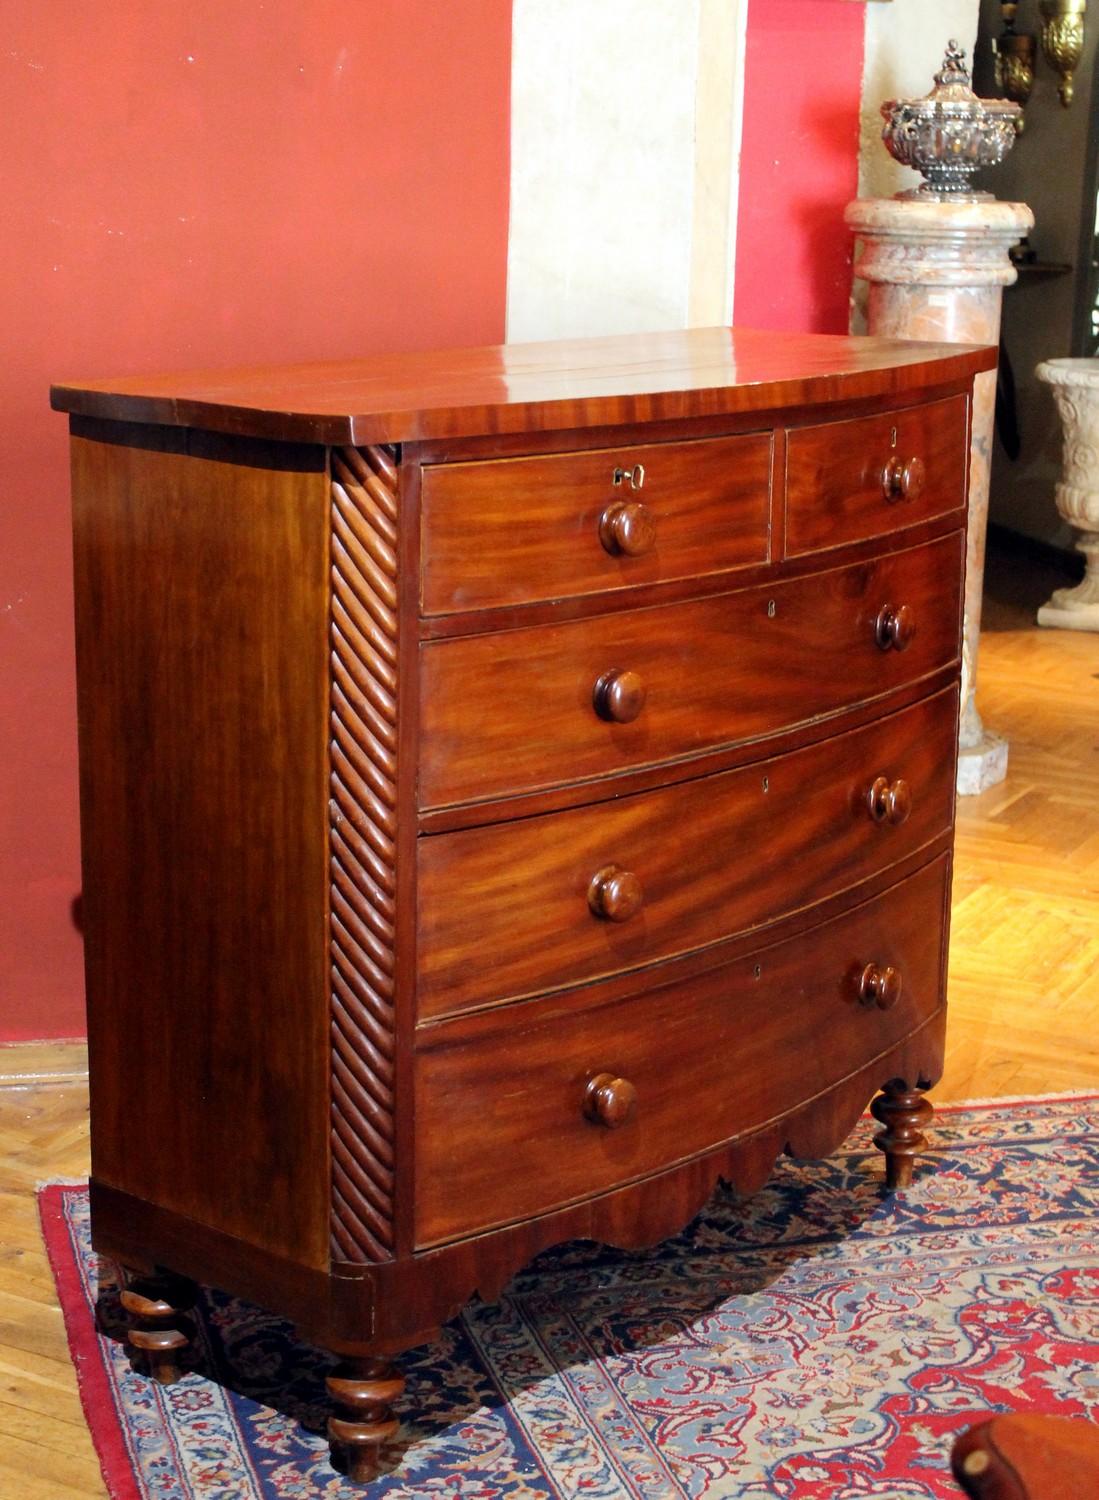 This late 19th-0early 20th century English handsome large and tall chest of drawers in rich mahogany has a bow front, is outfitted with five total drawers, two smaller top drawers, with three larger drawers below that are graduated in size. All